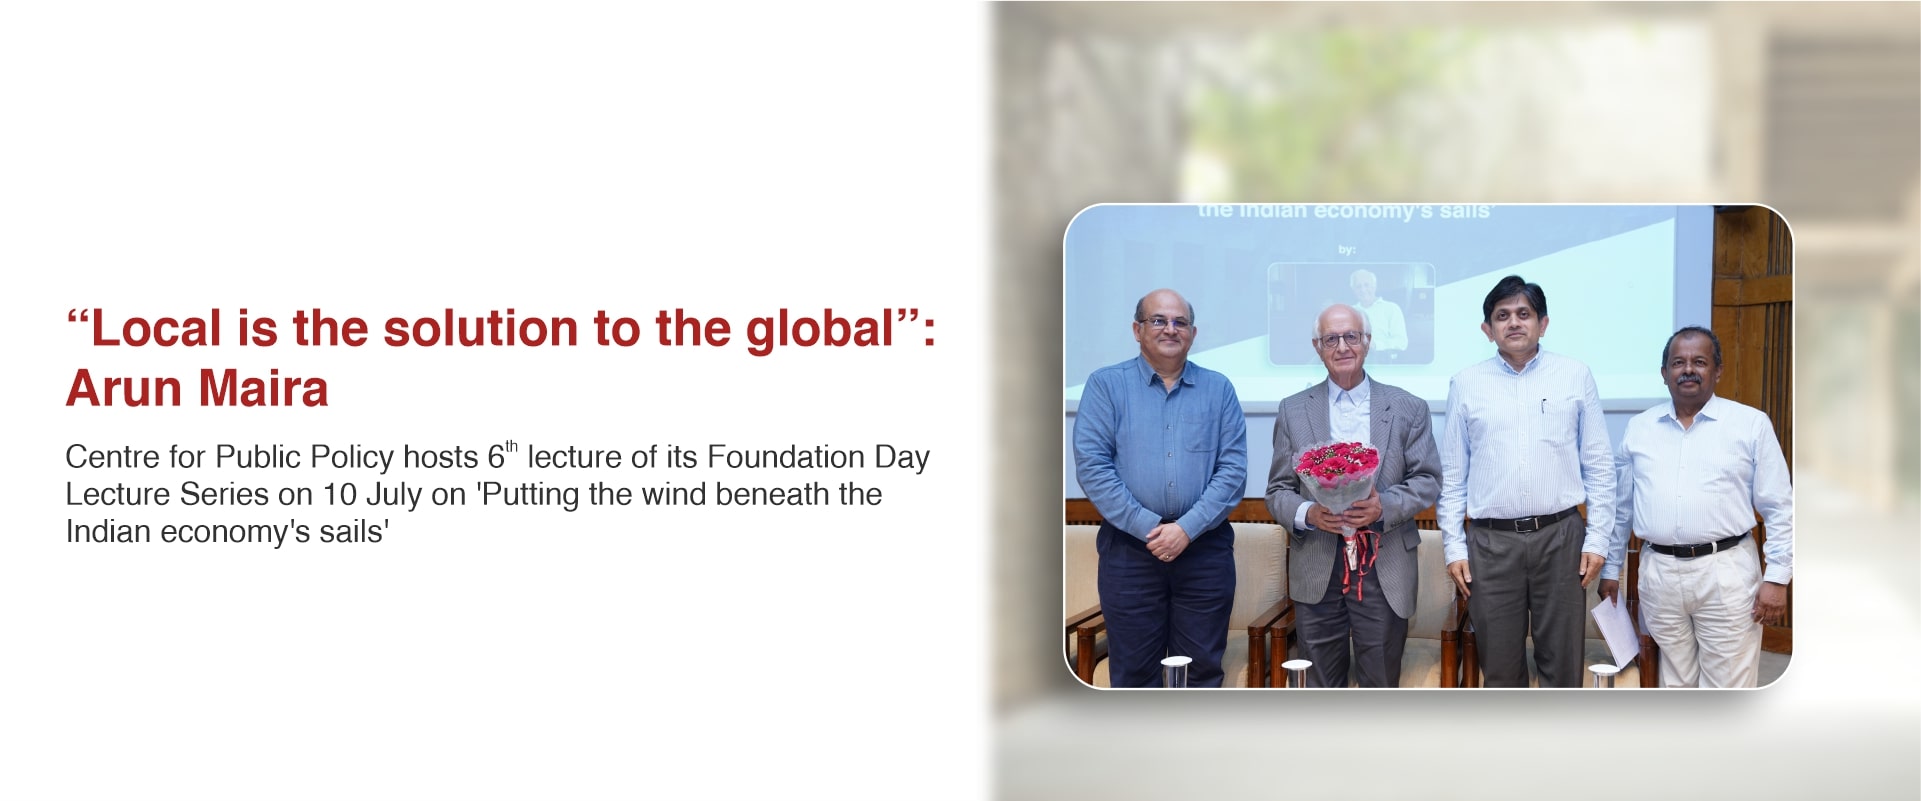 “Local is the solution to the global”: Arun Maira